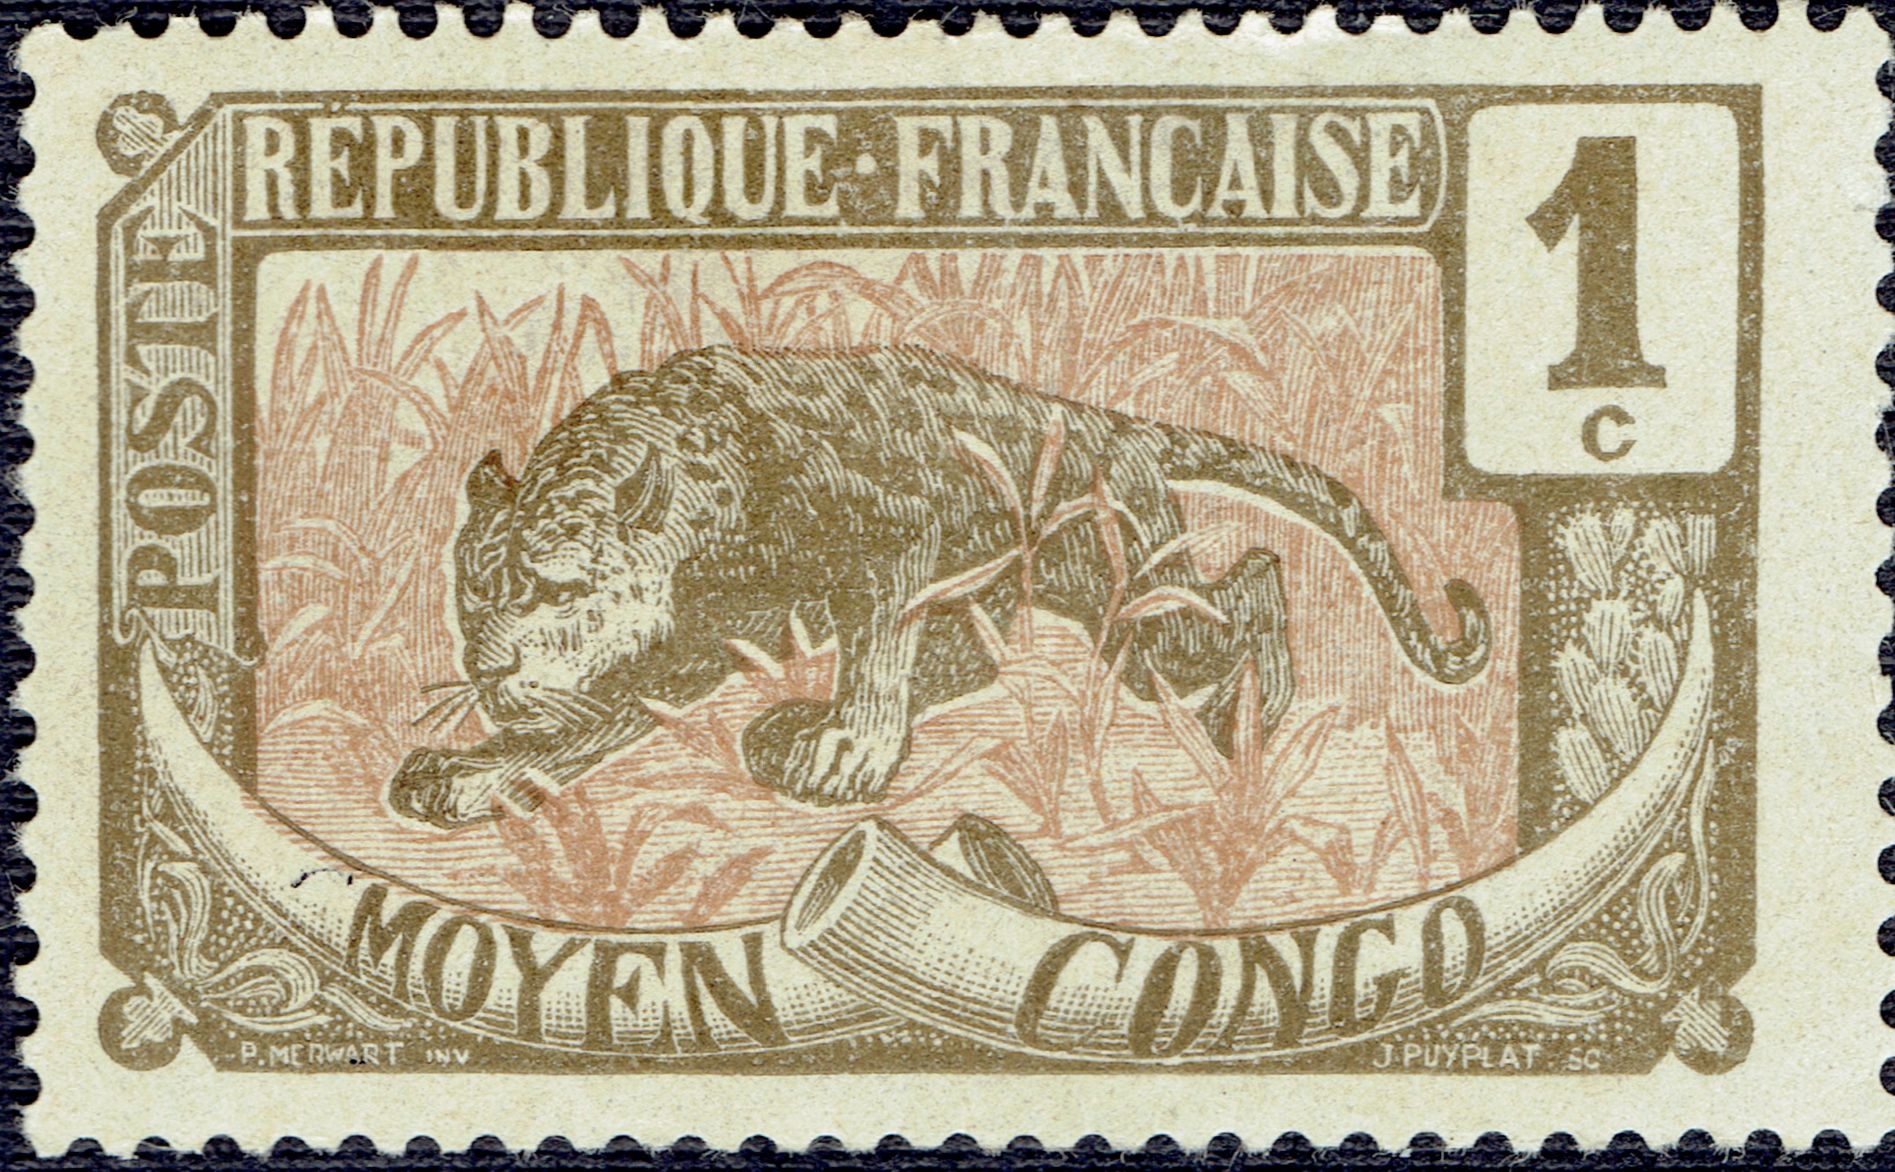 Middle Congo #1 (1907)